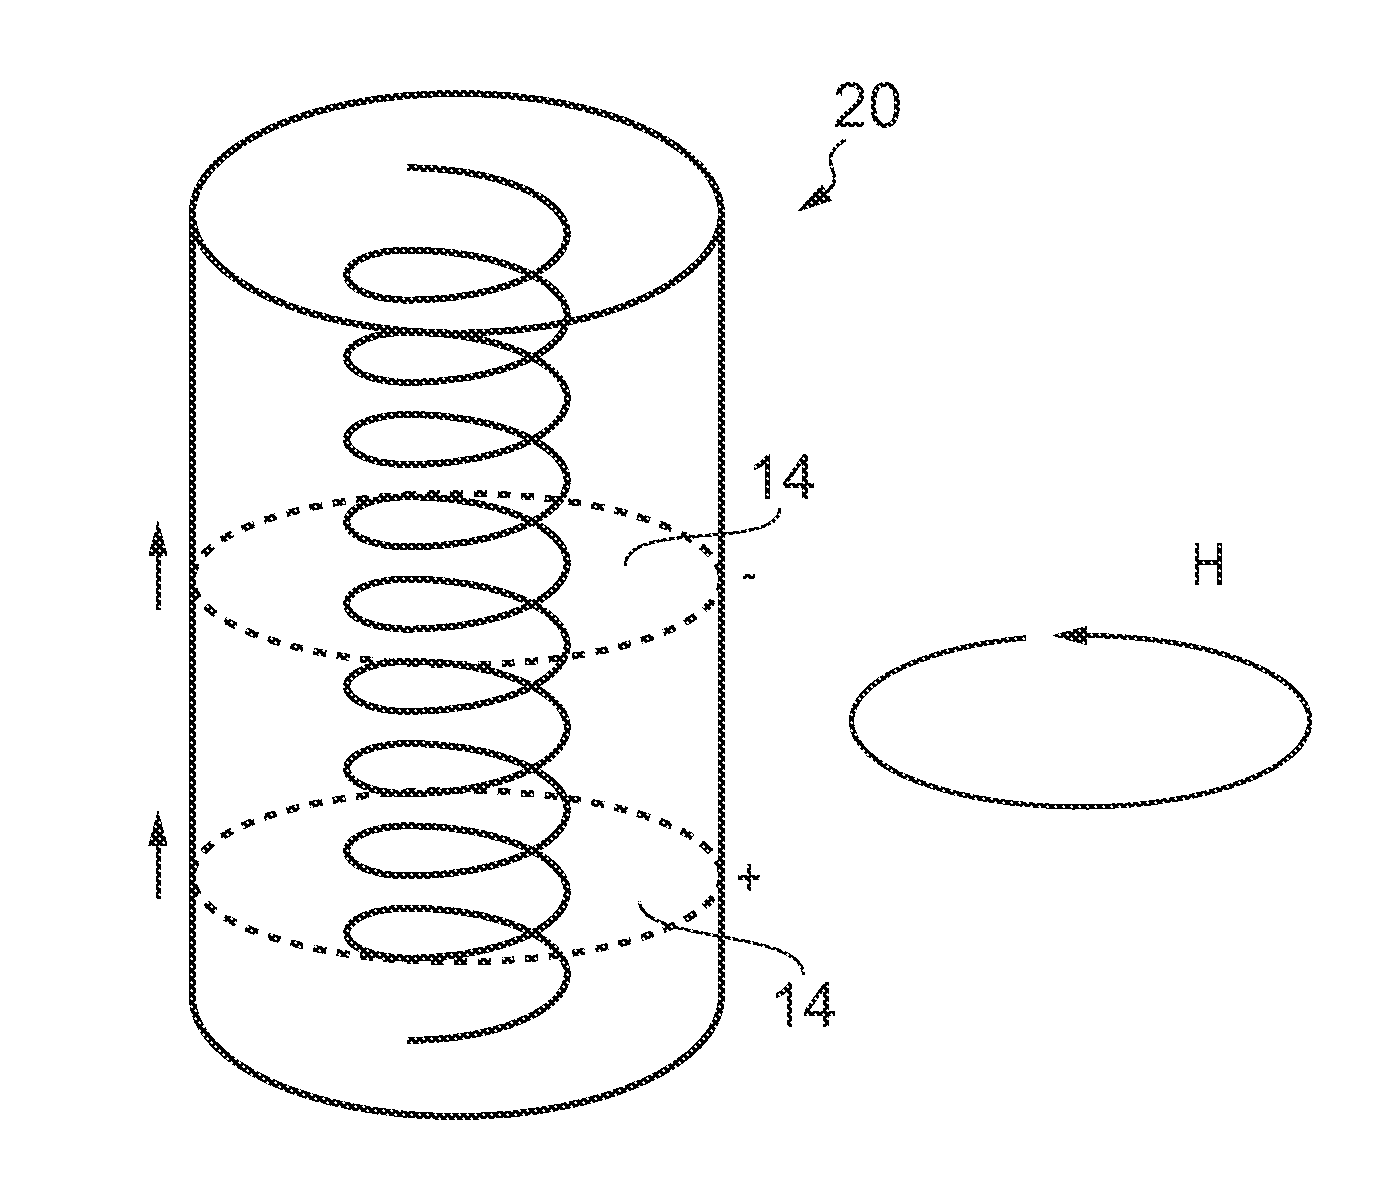 Magnetic Data Storage Device and Method